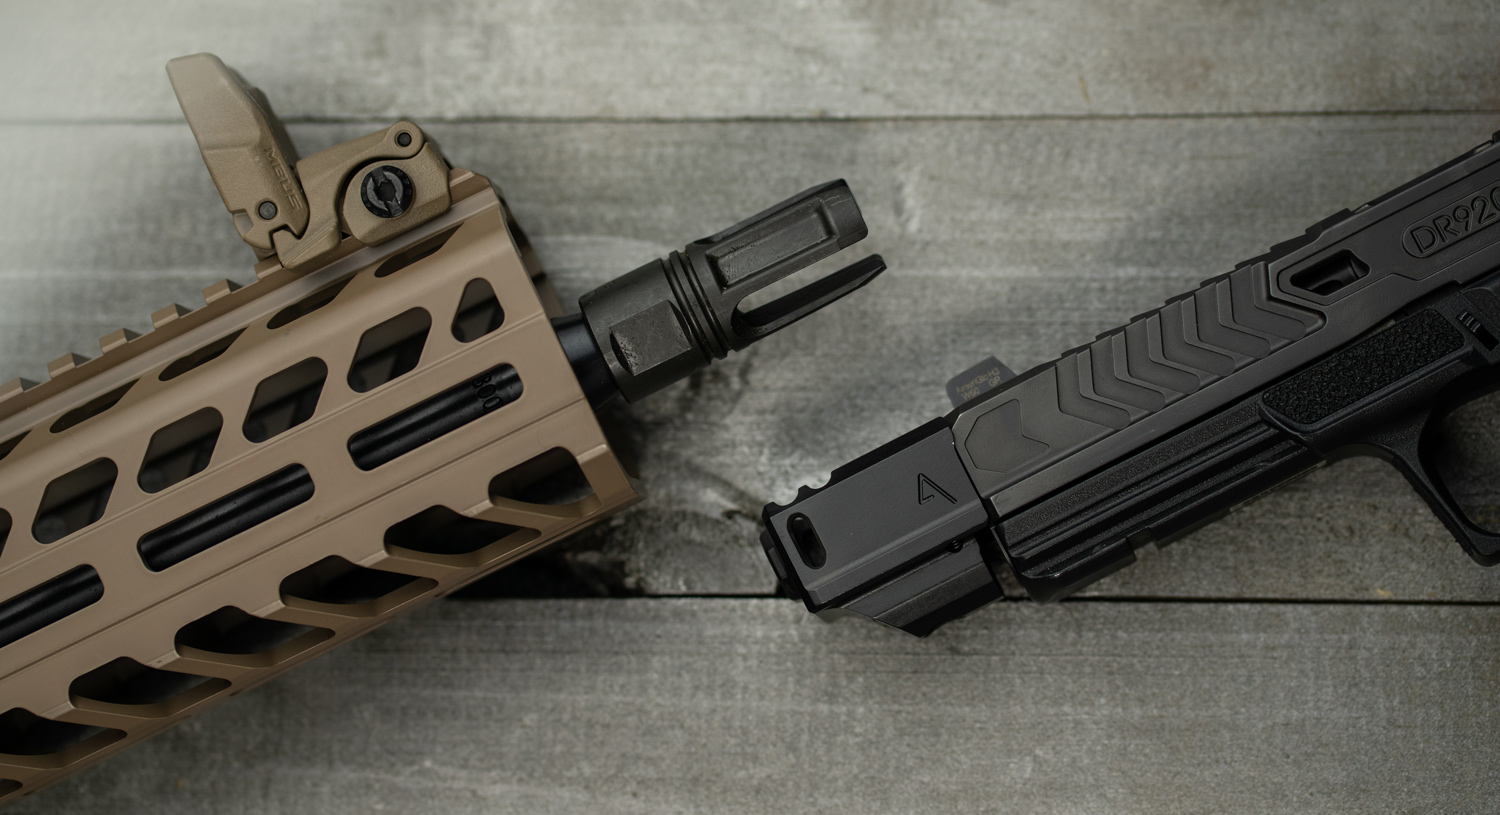 A rifle with a flash hider and a pistol compensator side by side